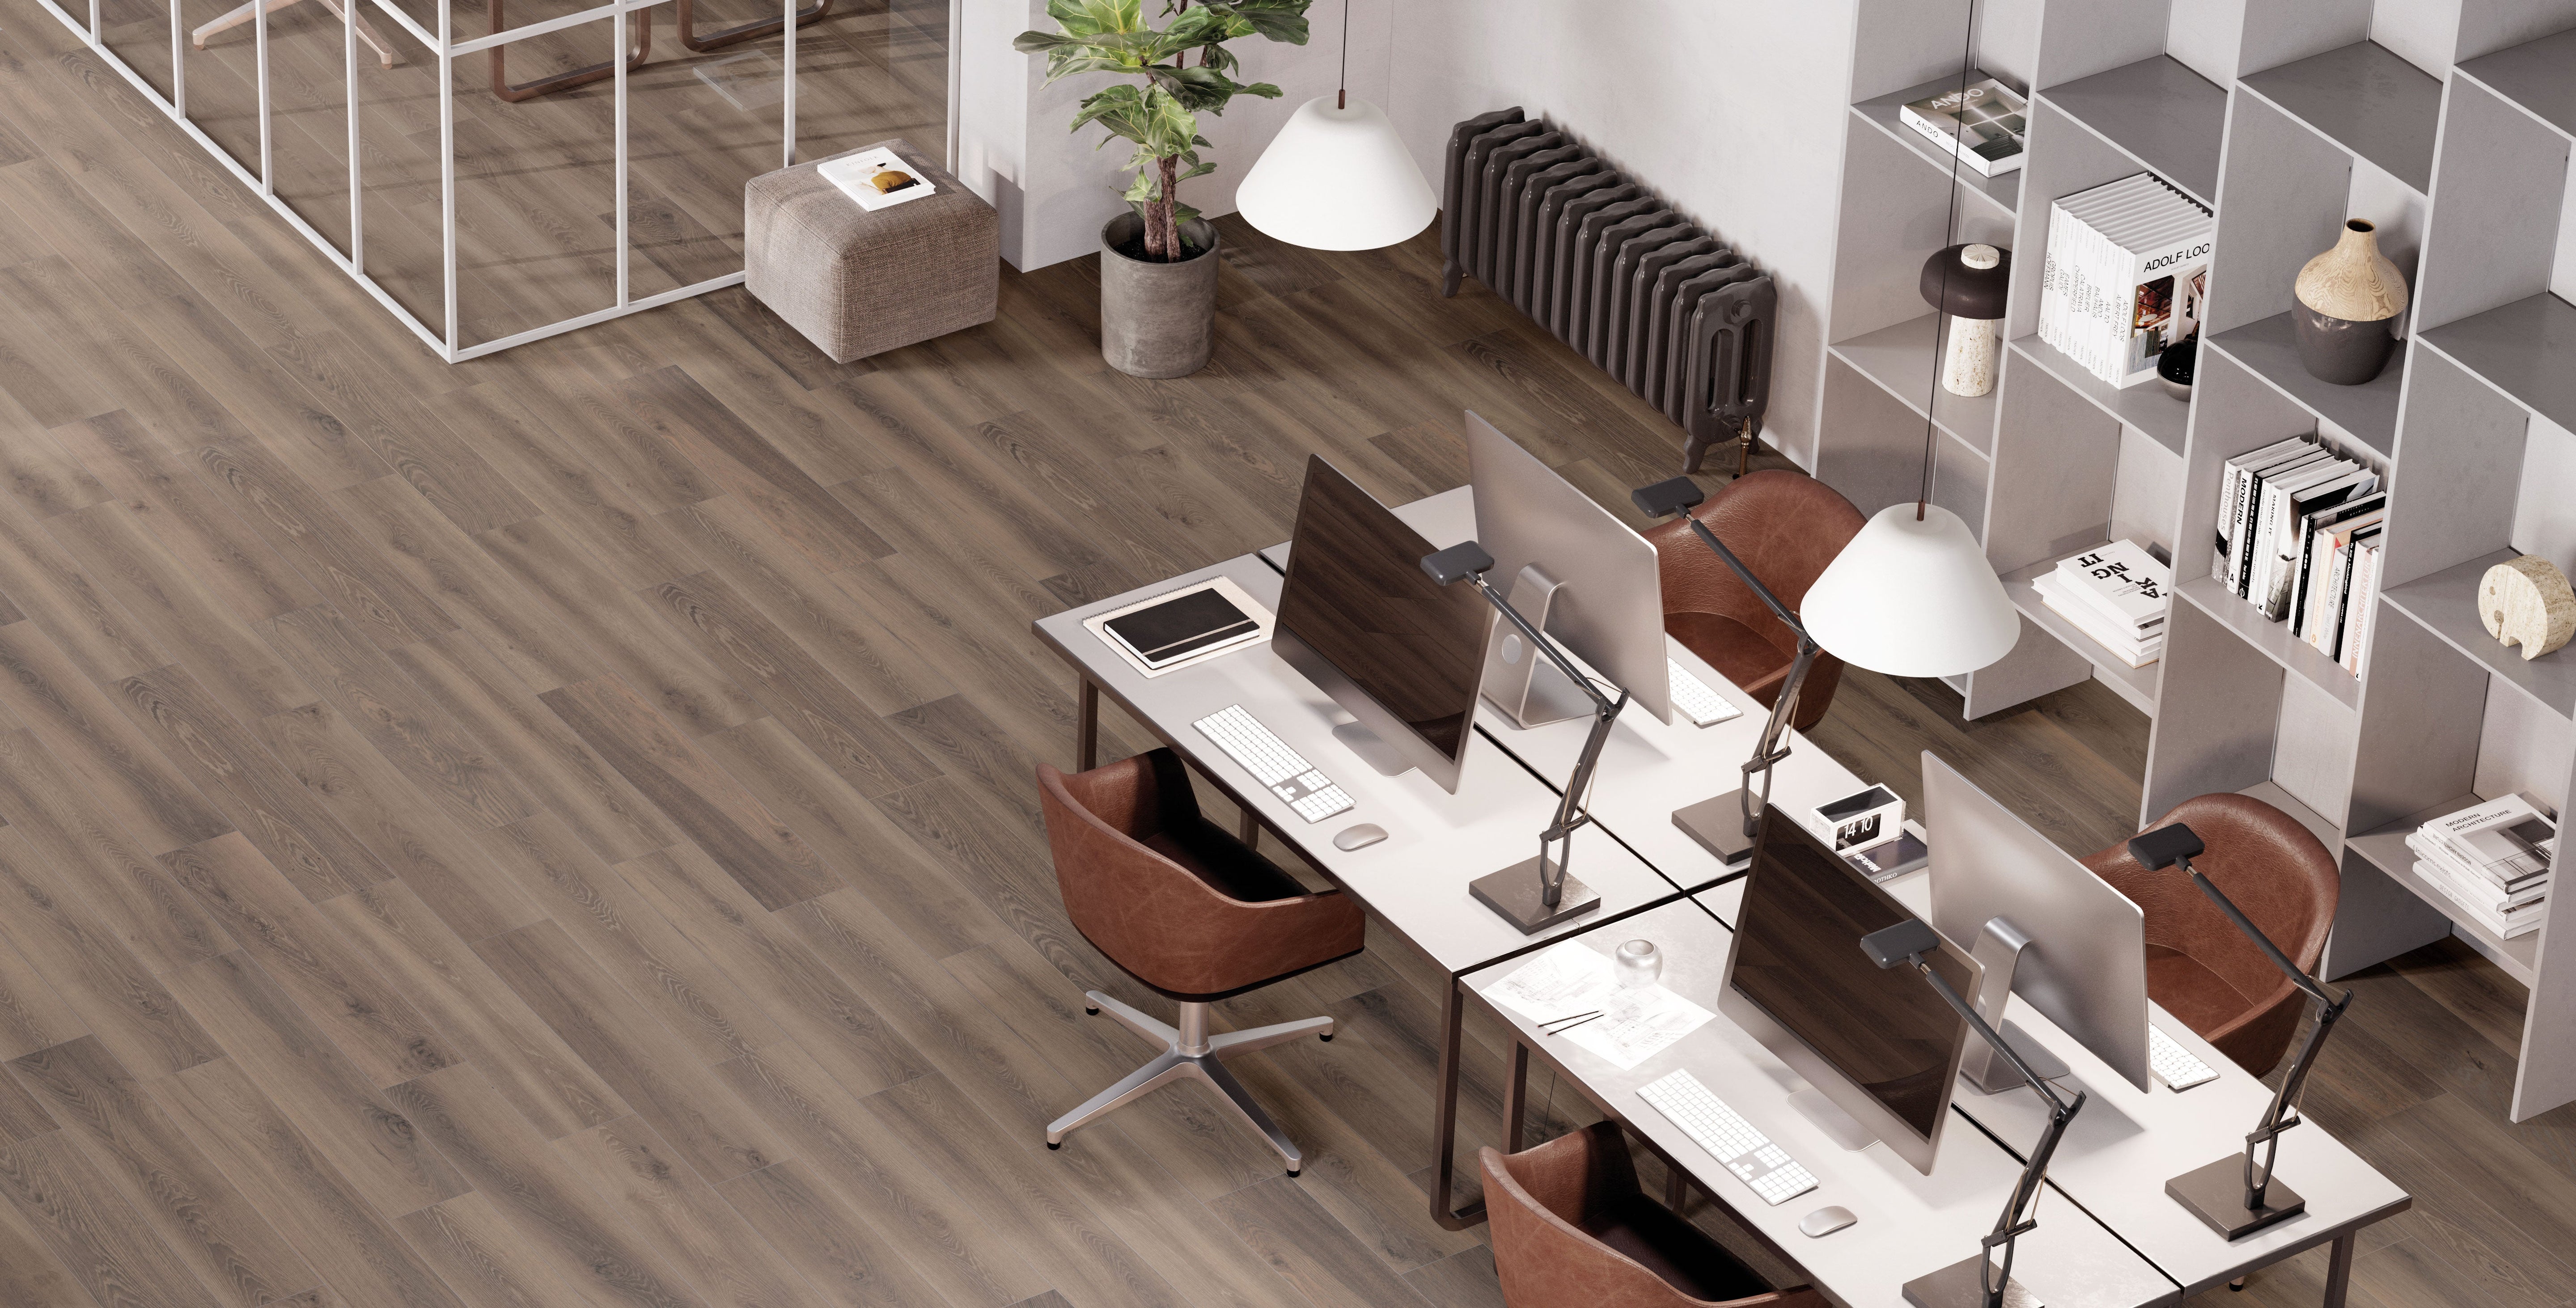 Porcelain tile flooring from the Oxford Collection by Surface Group showcasing a wood-look finish in a modern office setting with stylish furniture and decor.